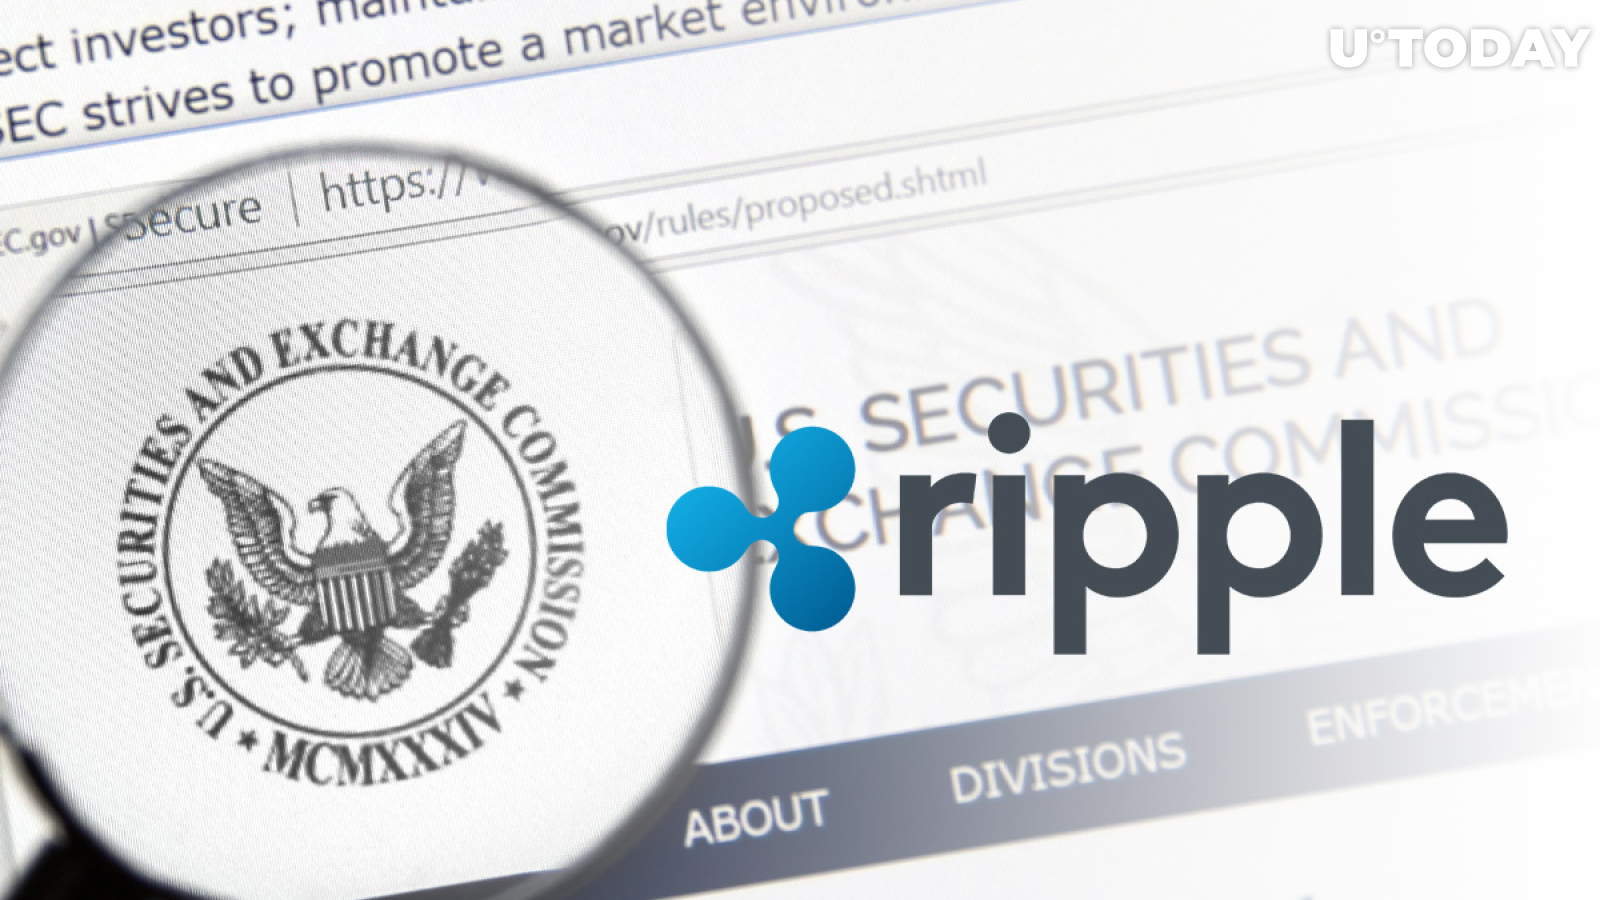 XRP Might Not Be a Security, According to SEC Commissioner 